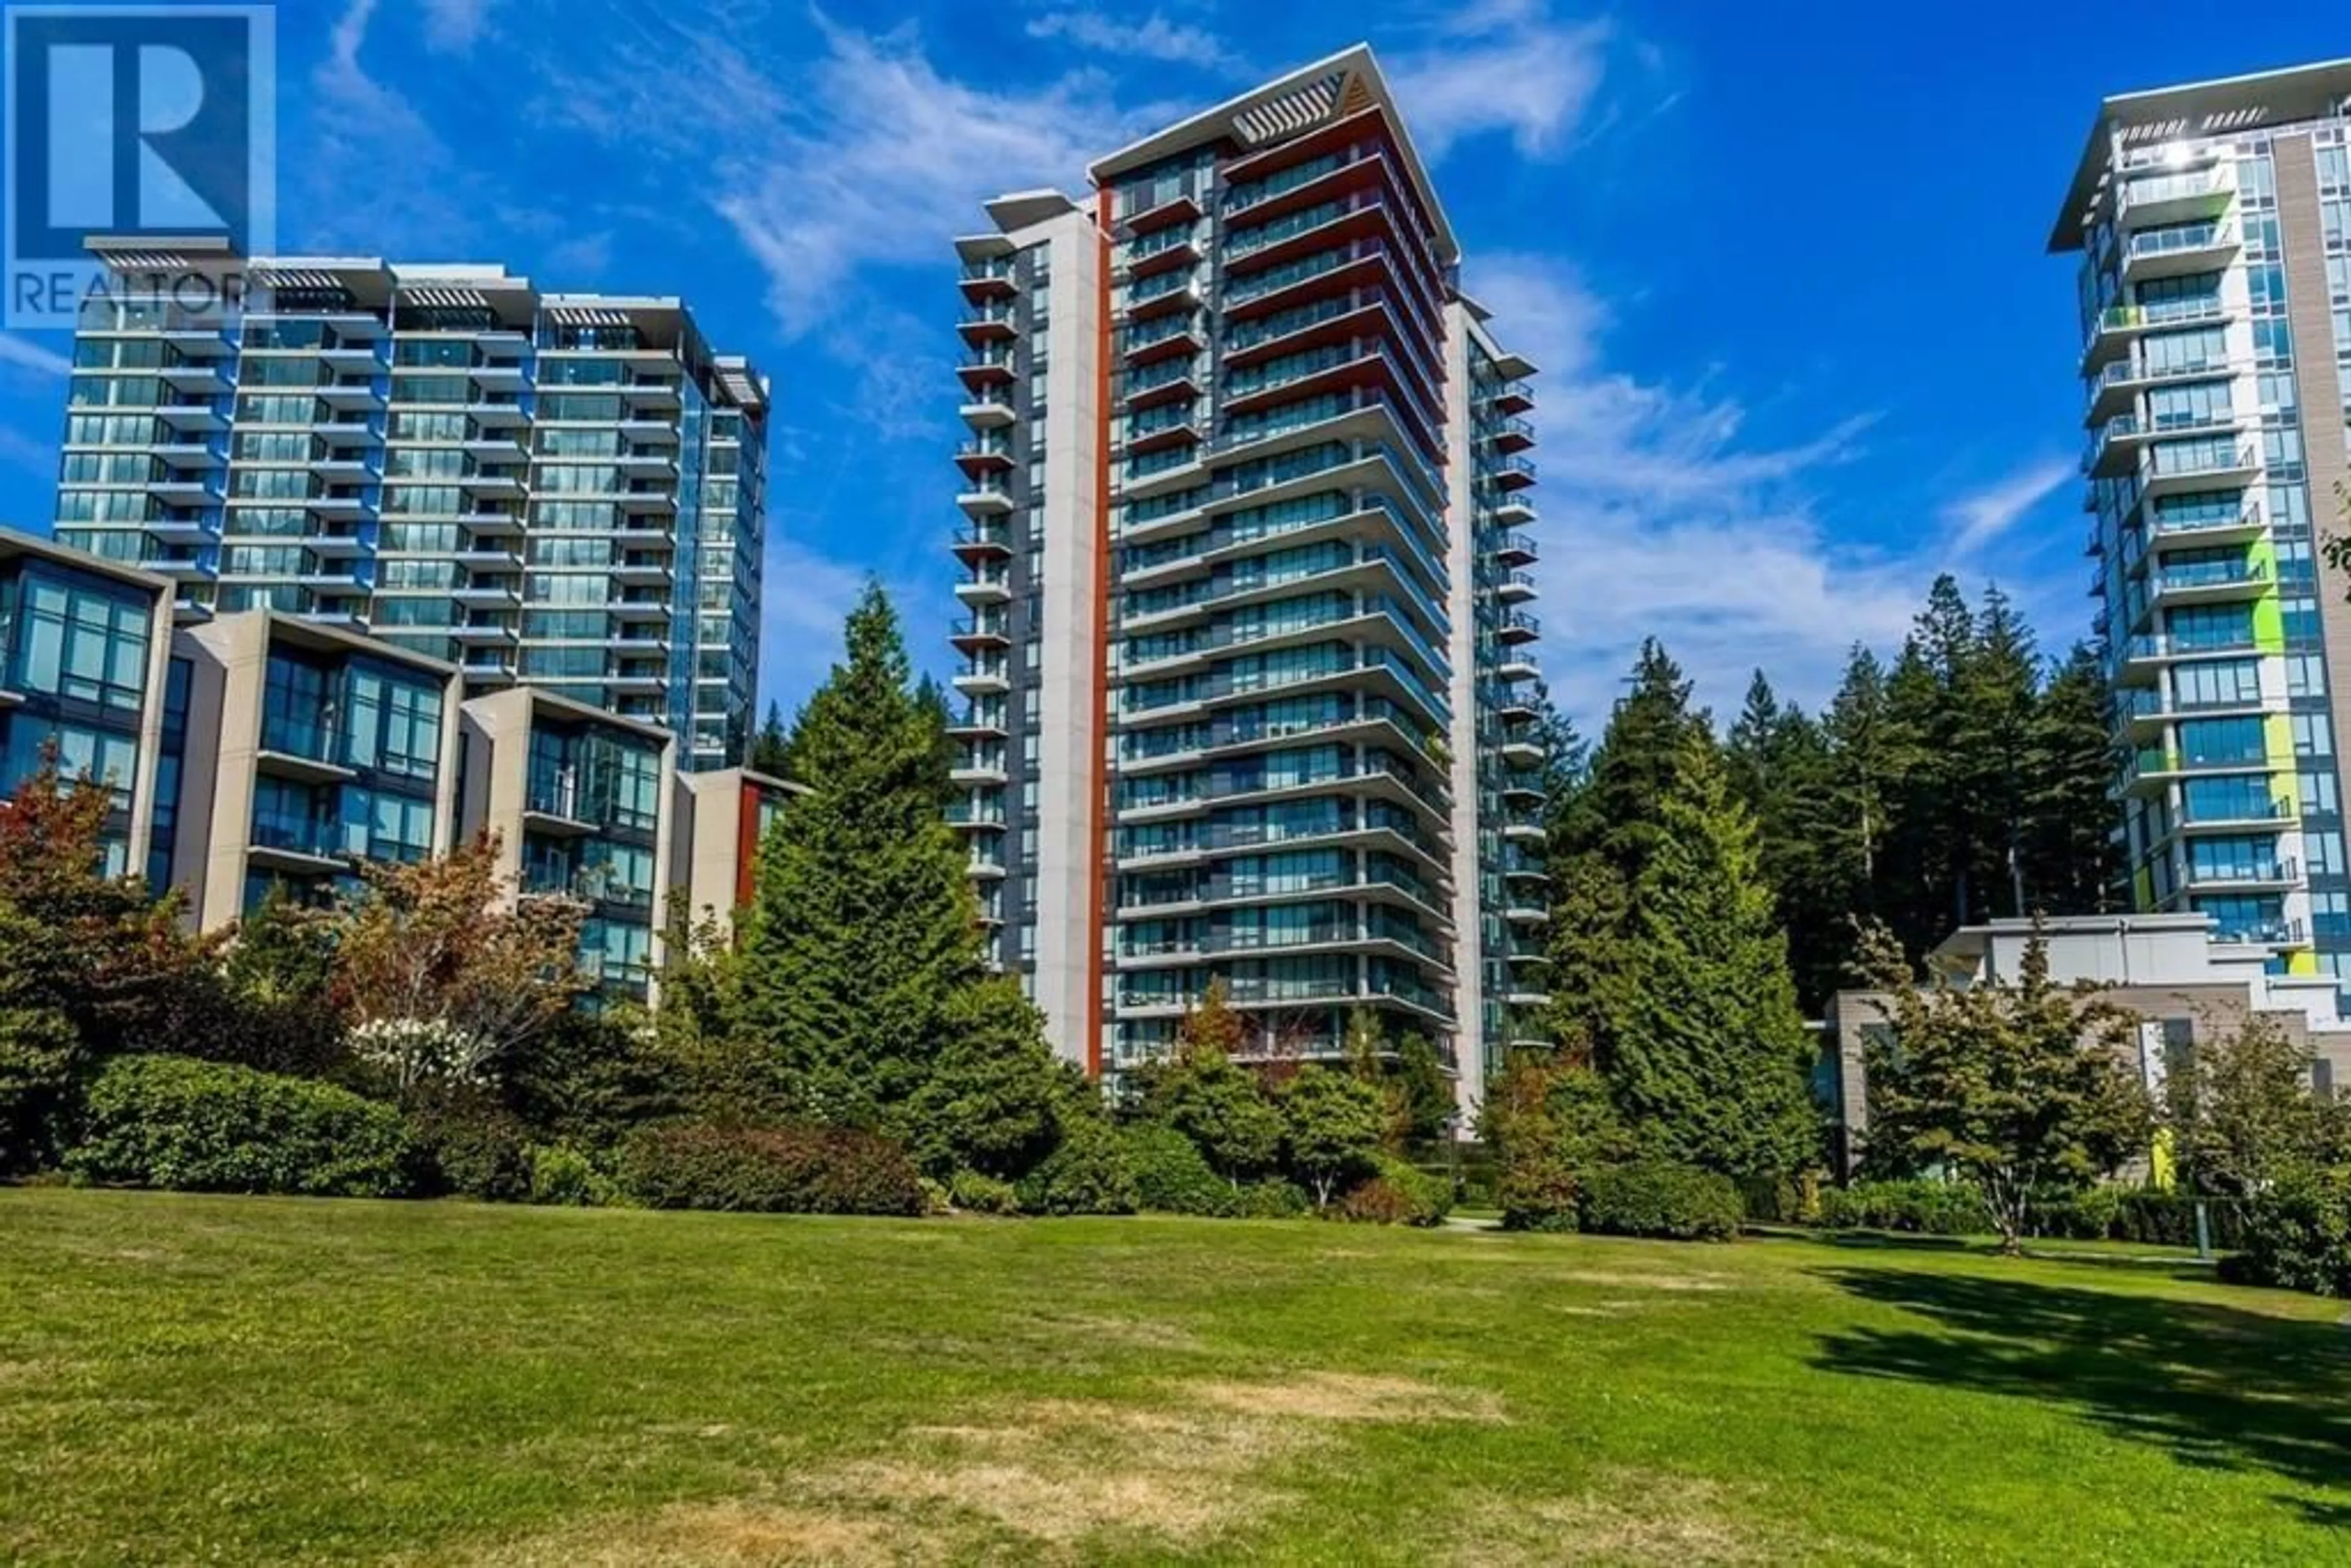 A pic from exterior of the house or condo for 1206 5628 BIRNEY AVENUE, Vancouver British Columbia V6S0H7